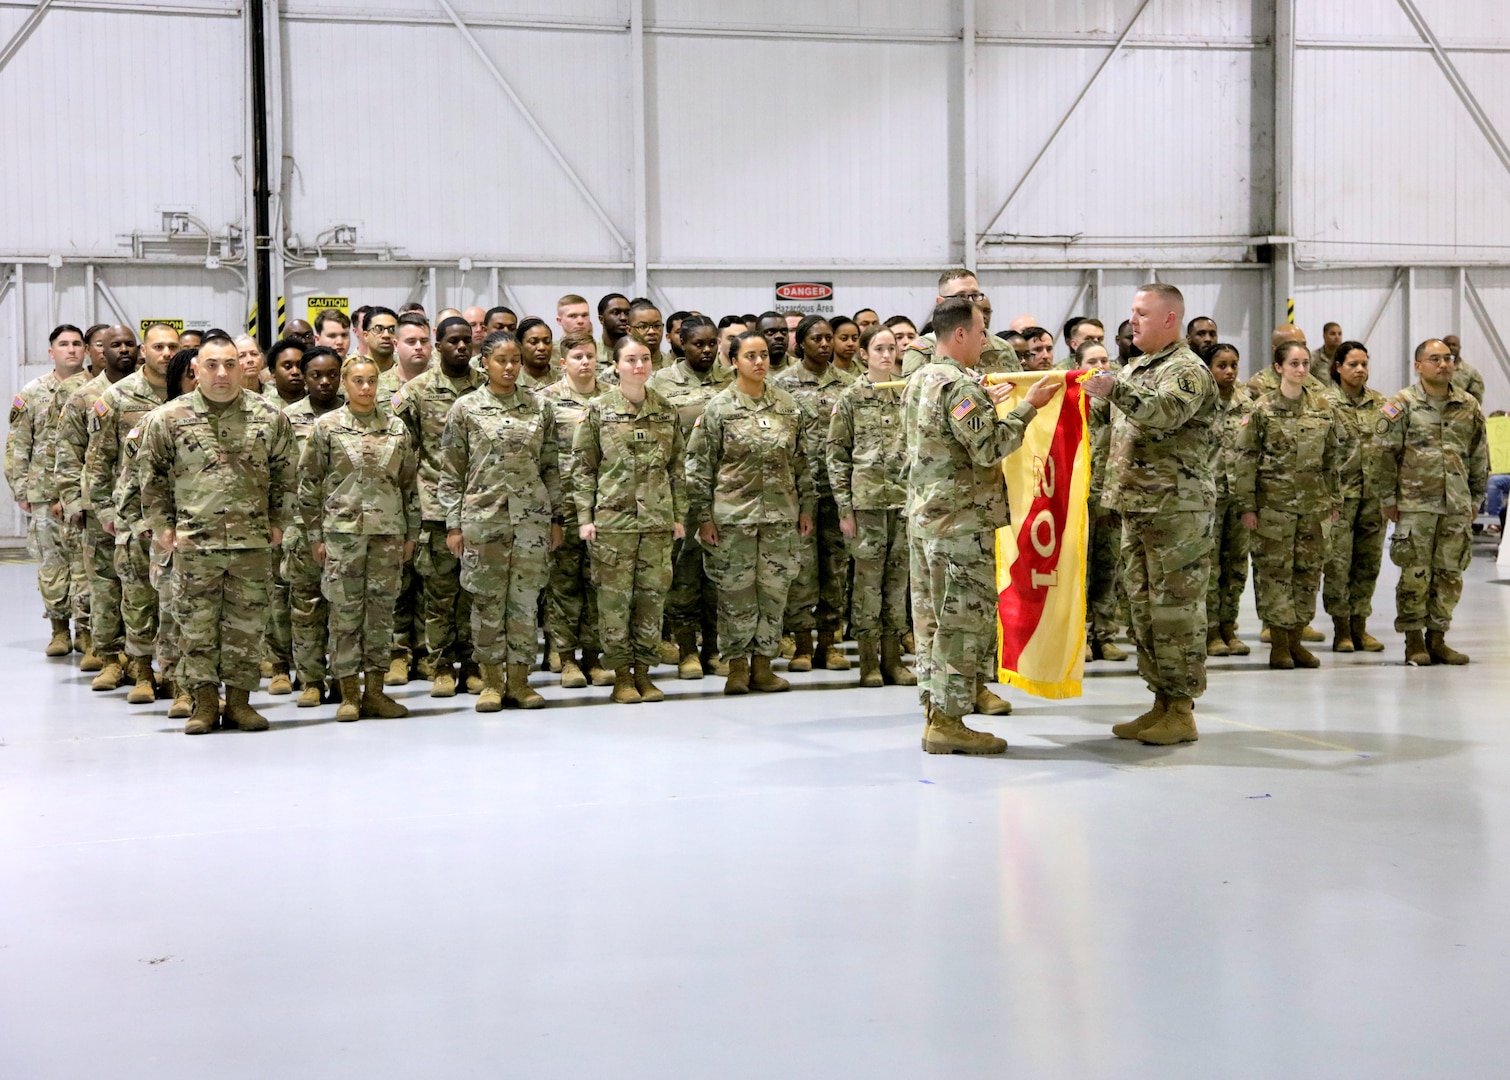 Col. Matthew Kukla and Command Sgt. Major Lafayette Deal, command team of the Georgia National Guard’s 201st Regional Support Group (Forward), uncase the unit colors during a welcome home ceremony at the Clay National Guard Center in Marietta, Ga., Dec. 1 following a 10-month deployment to Europe.